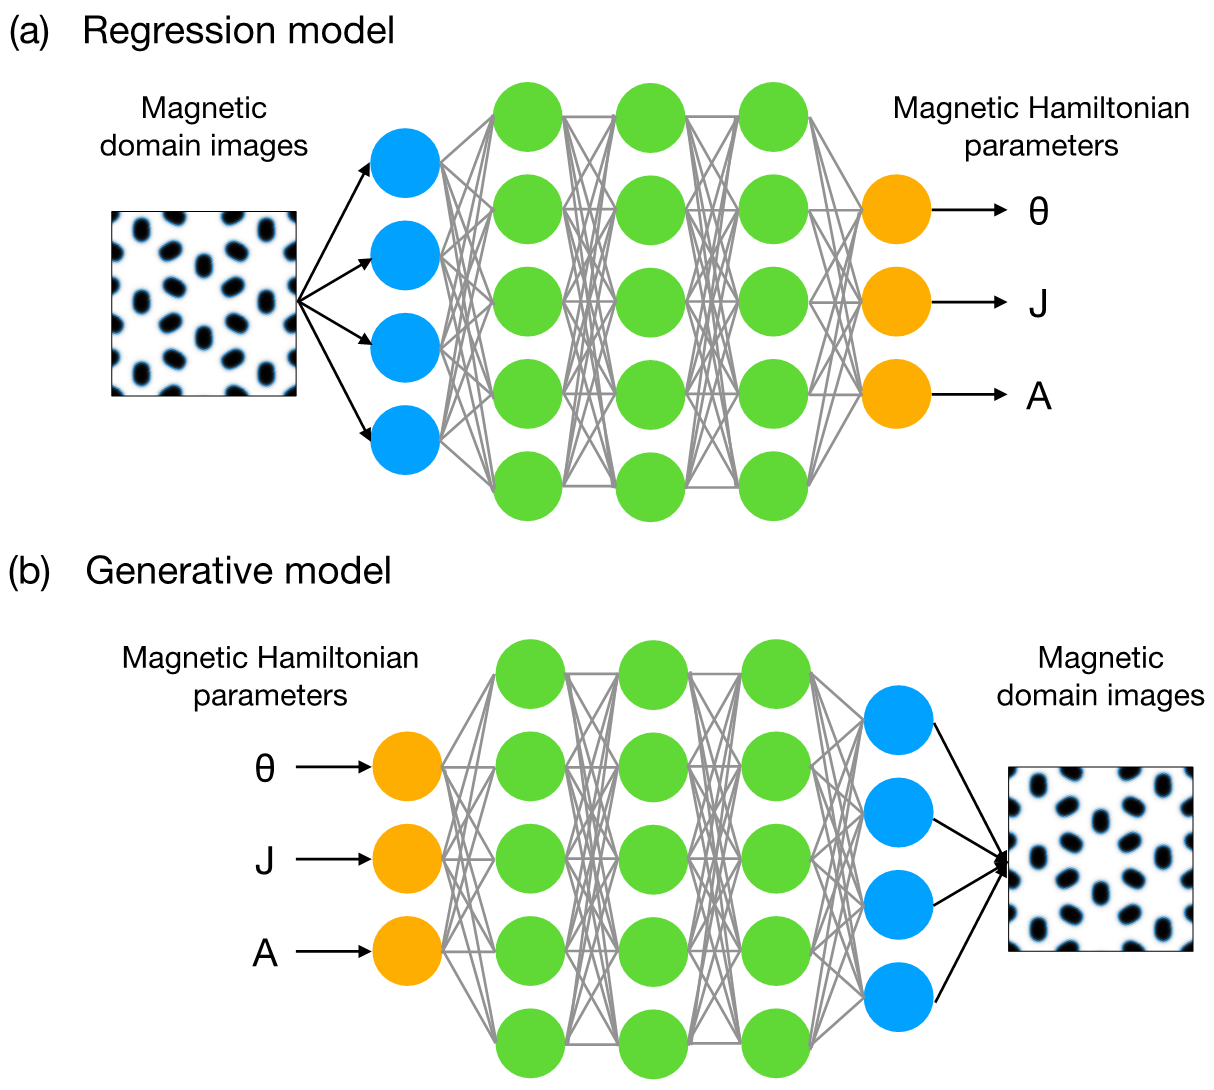 Figure 1. Schematic diagrams illustrating two deep neural network models developed in this study. (a) The regression model for estimating magnetic Hamiltonian parameters from input magnetic domain images. (b) The generative model for producing predicted magnetic domain images based on input parameters.